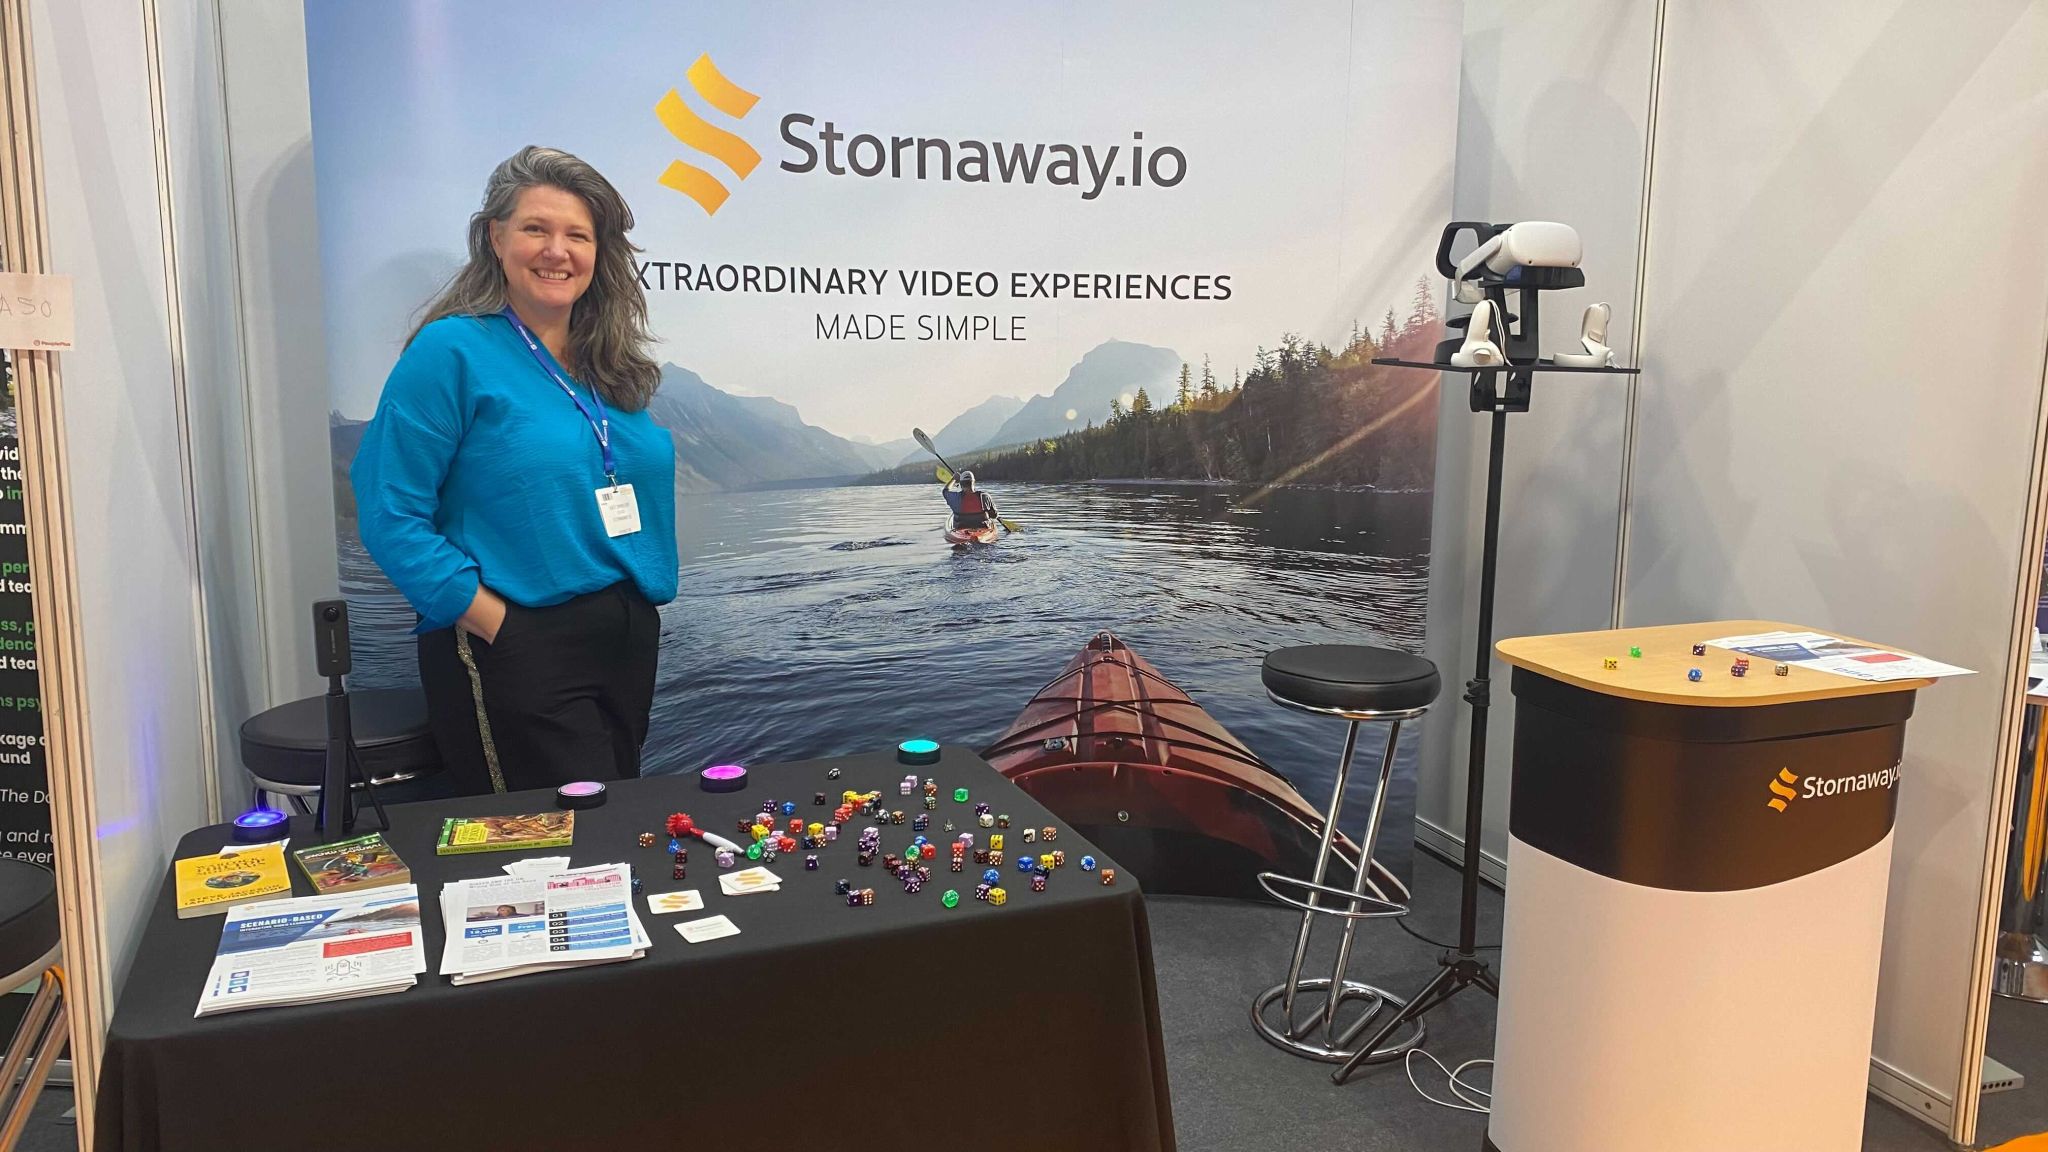 Kate Dimbleby - a lady with long brown hair wearing a blue shirt - stands in front of a poster for Stornaway.io at a conference